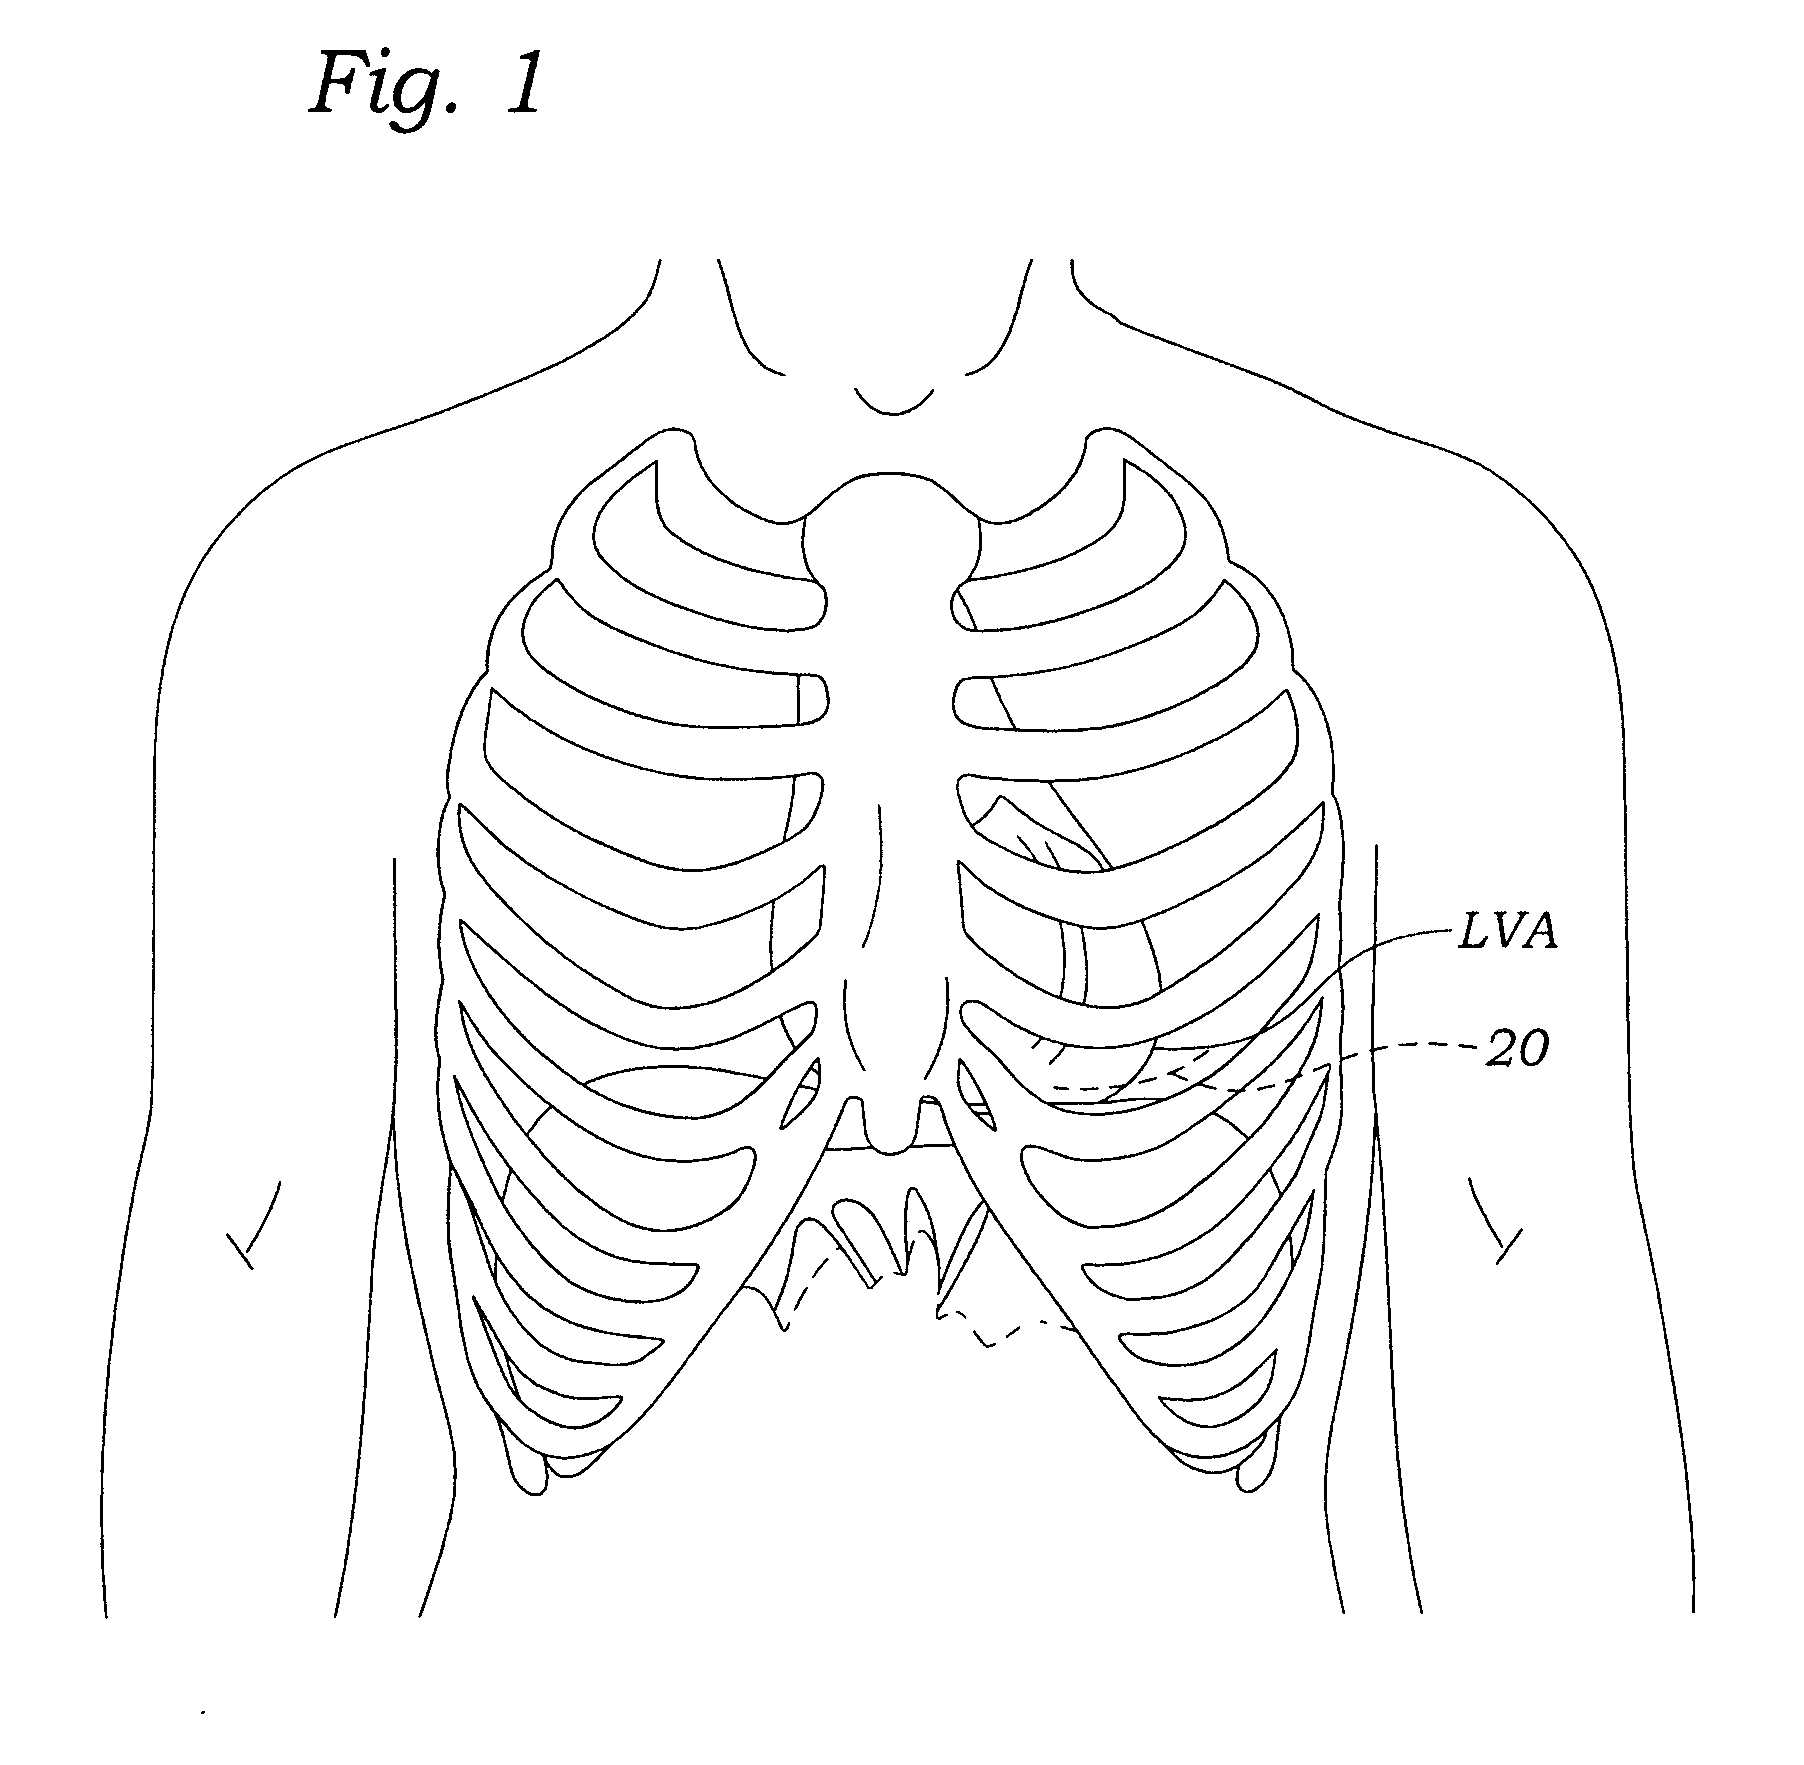 Transapical heart valve delivery system and method